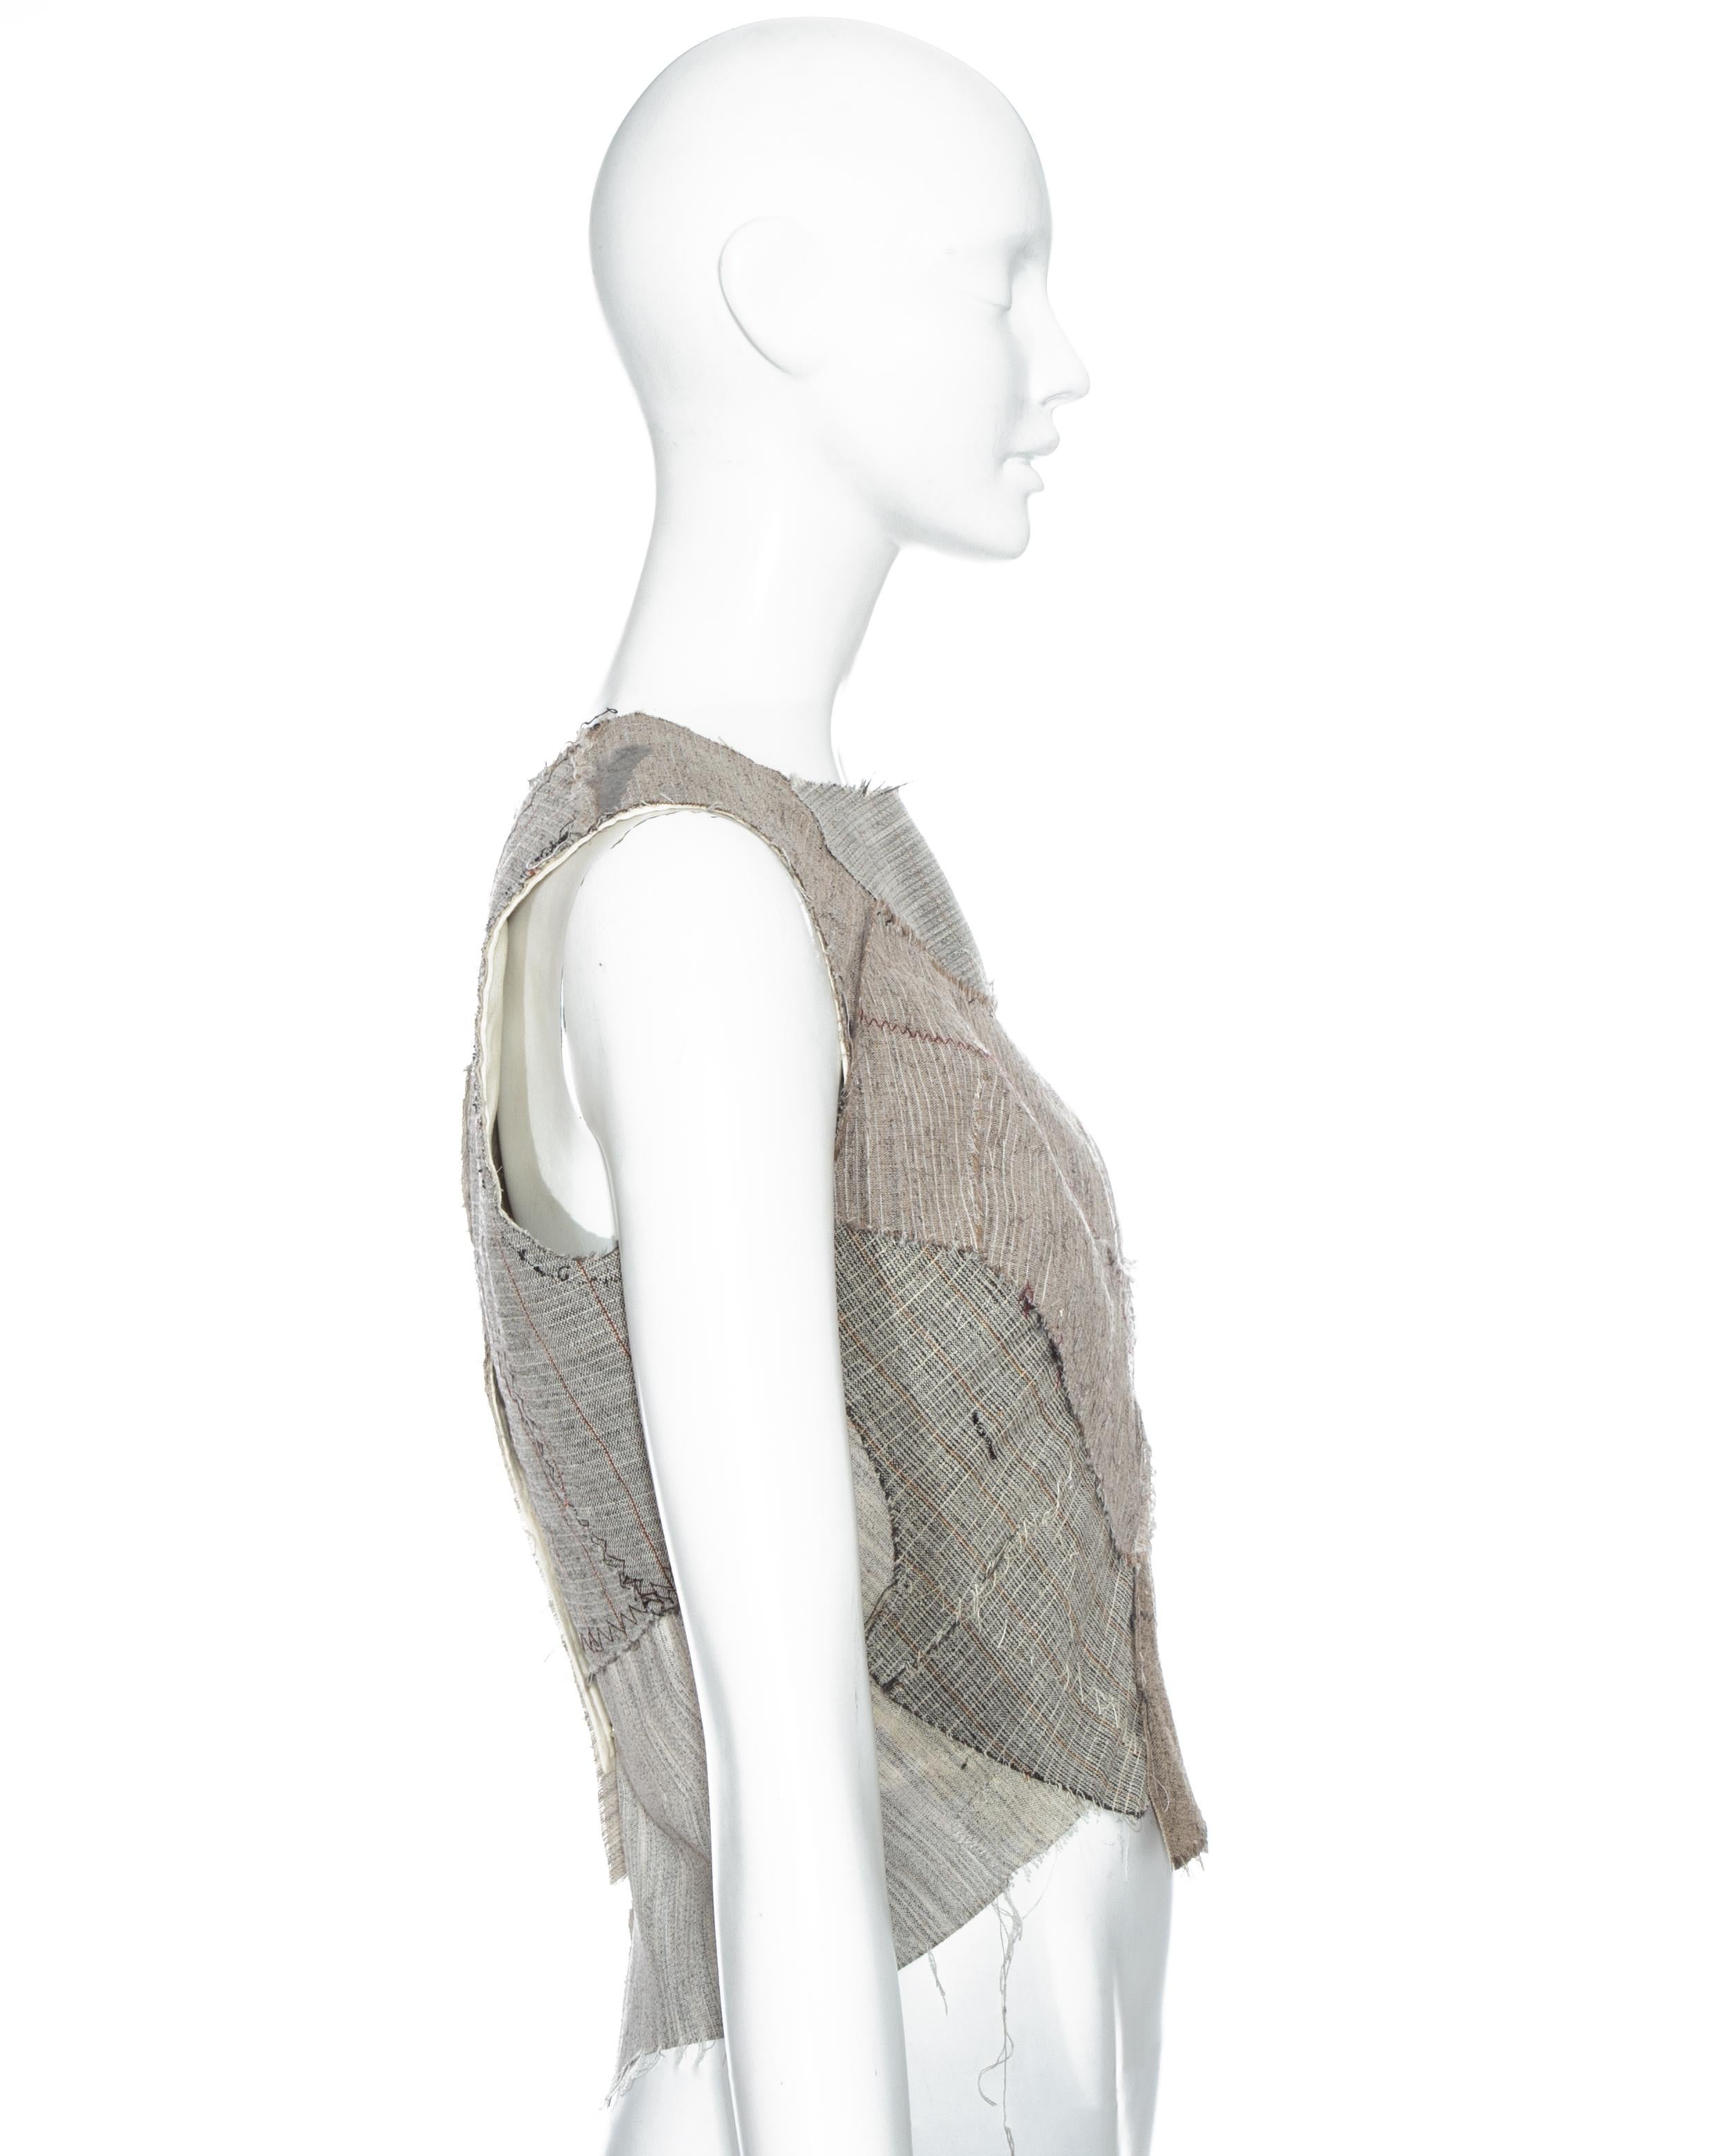 Martin Margiela artisanal corset top made with tailoring canvases, fw 2003 In Excellent Condition For Sale In London, GB